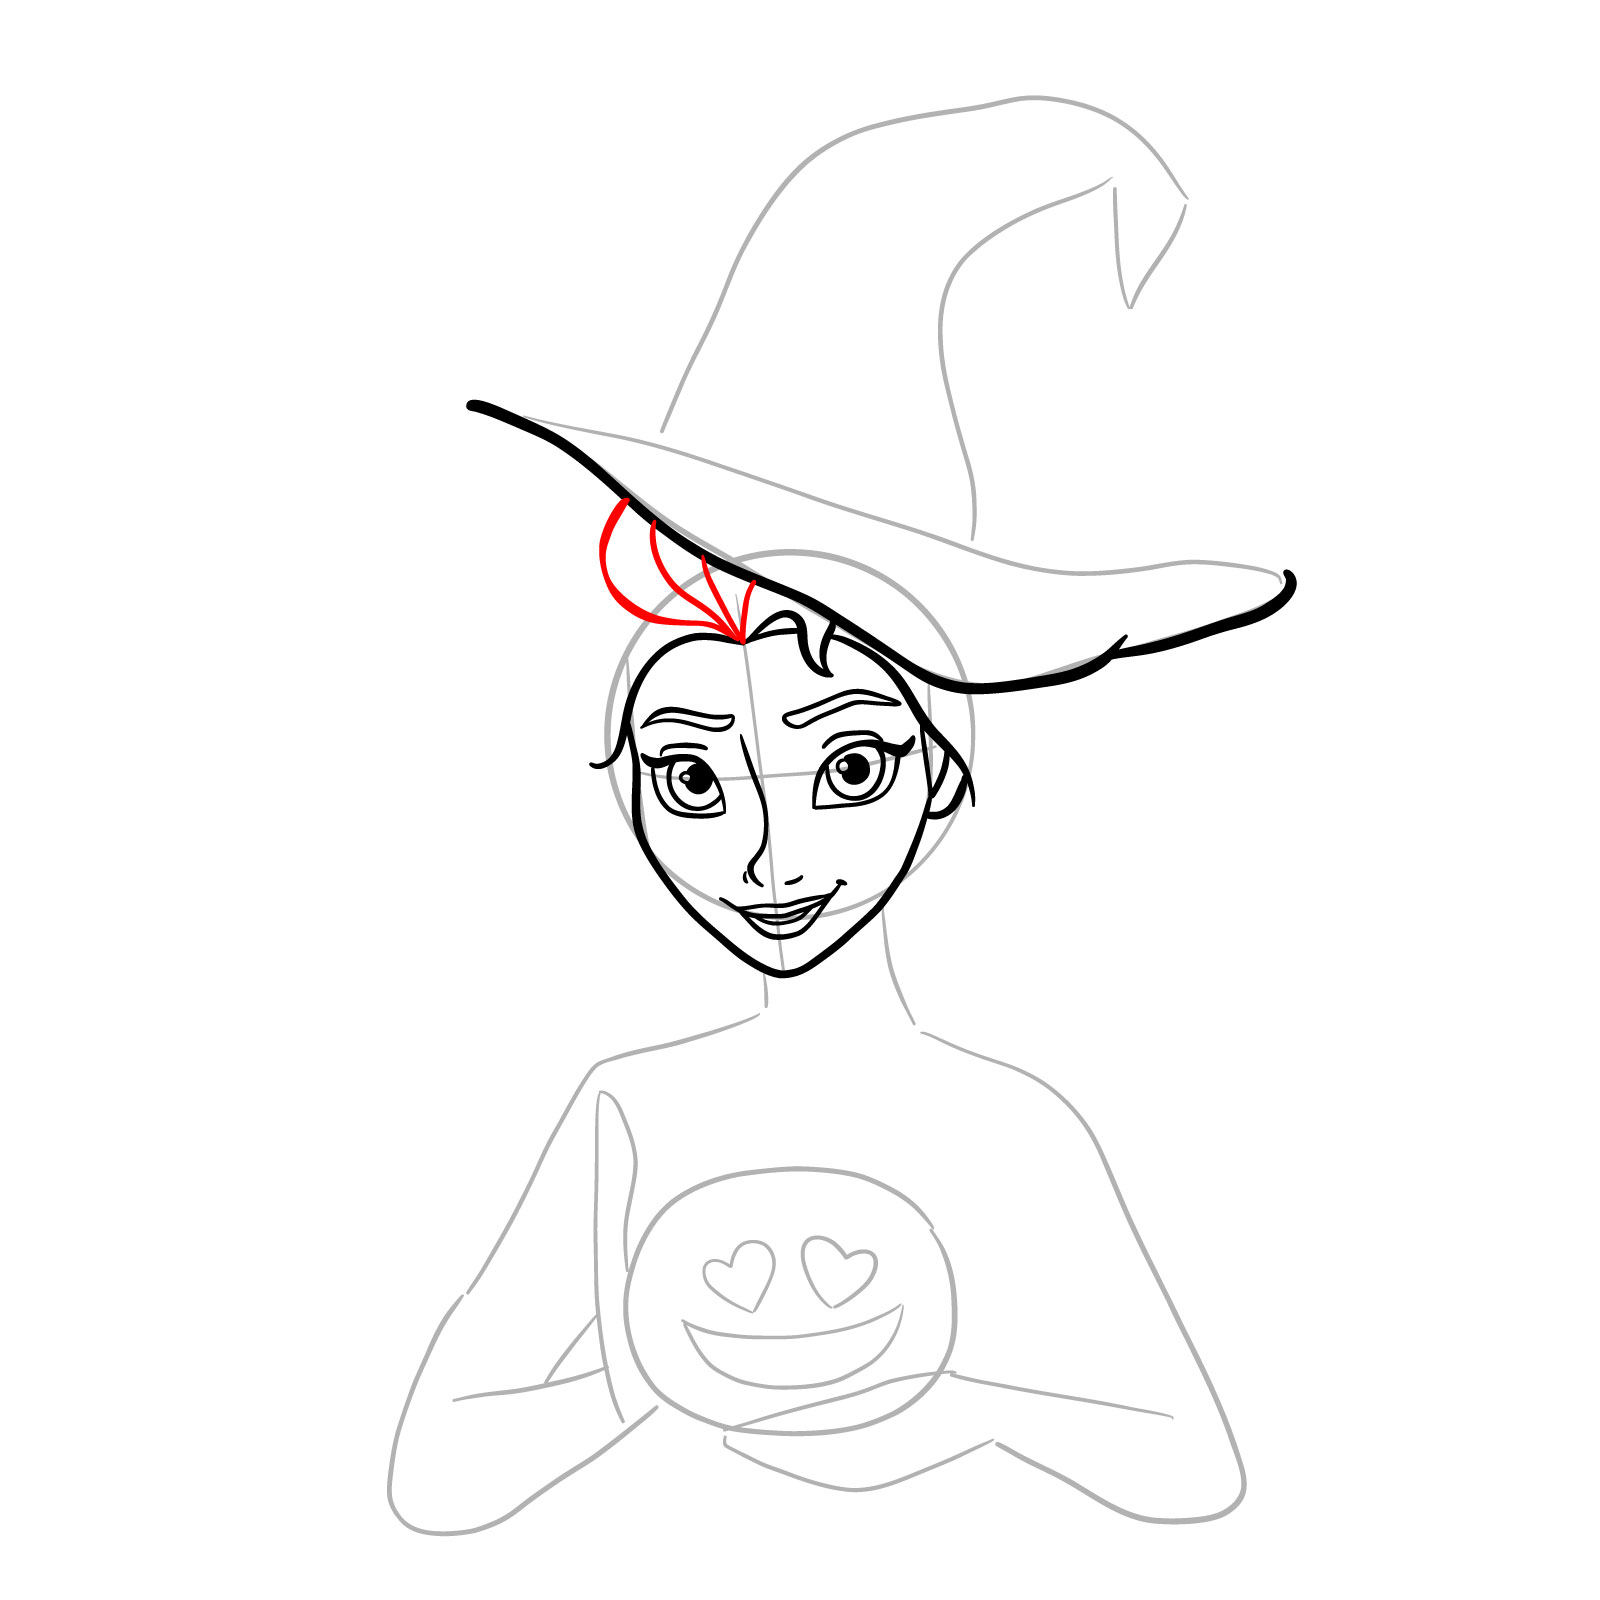 How to Draw Witch Elsa on Halloween - step 12